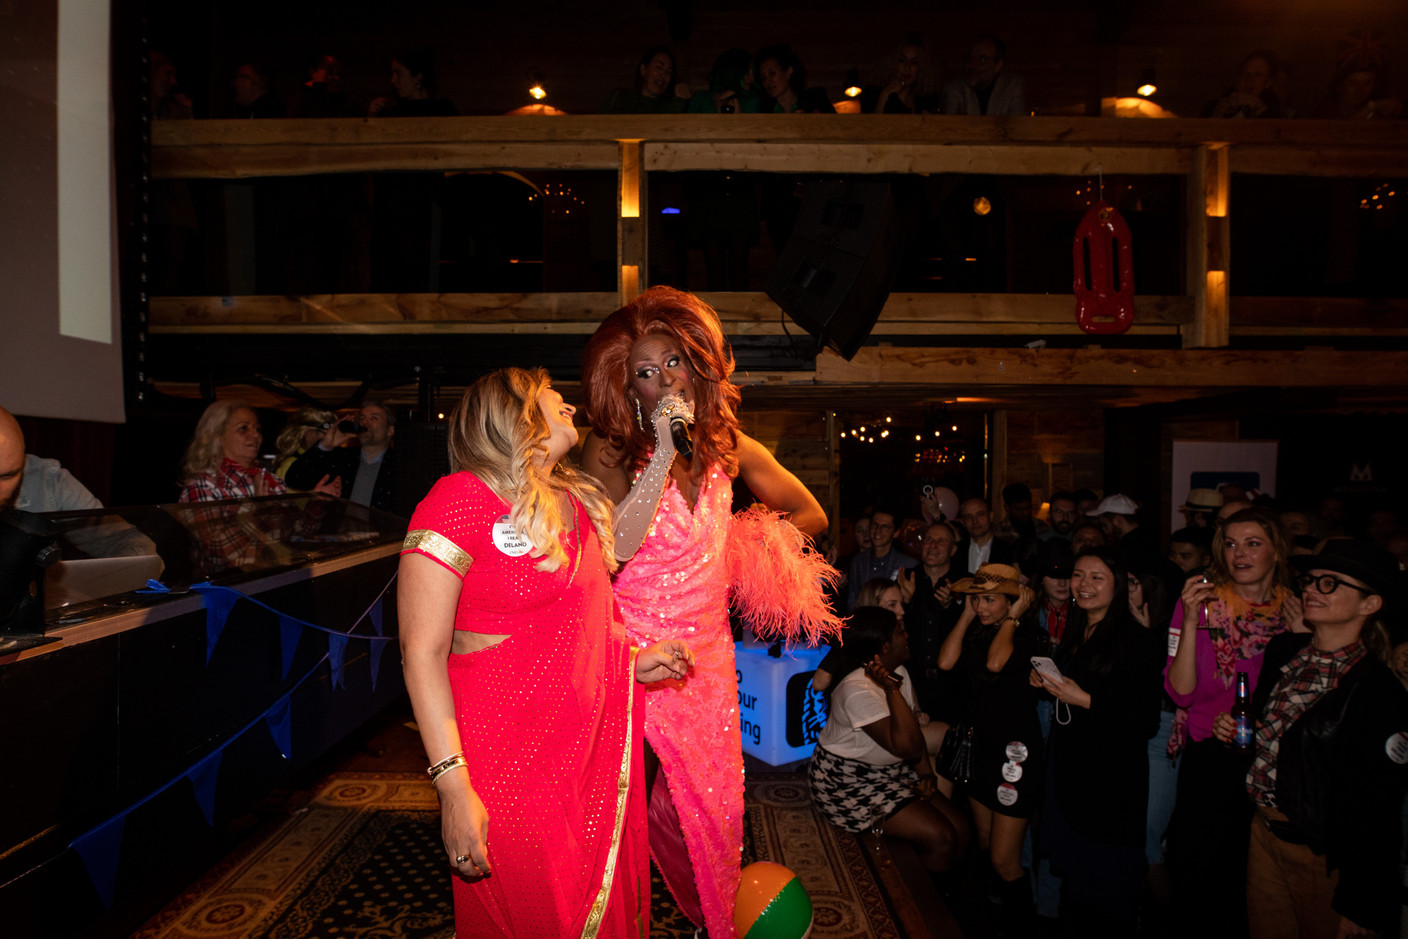 “Spice it up” prize-winner Barbara, seen with Nickie Nicole during Delano’s 12th anniversary party, 23 February 2023. Photo: Eva Krins/Maison Moderne